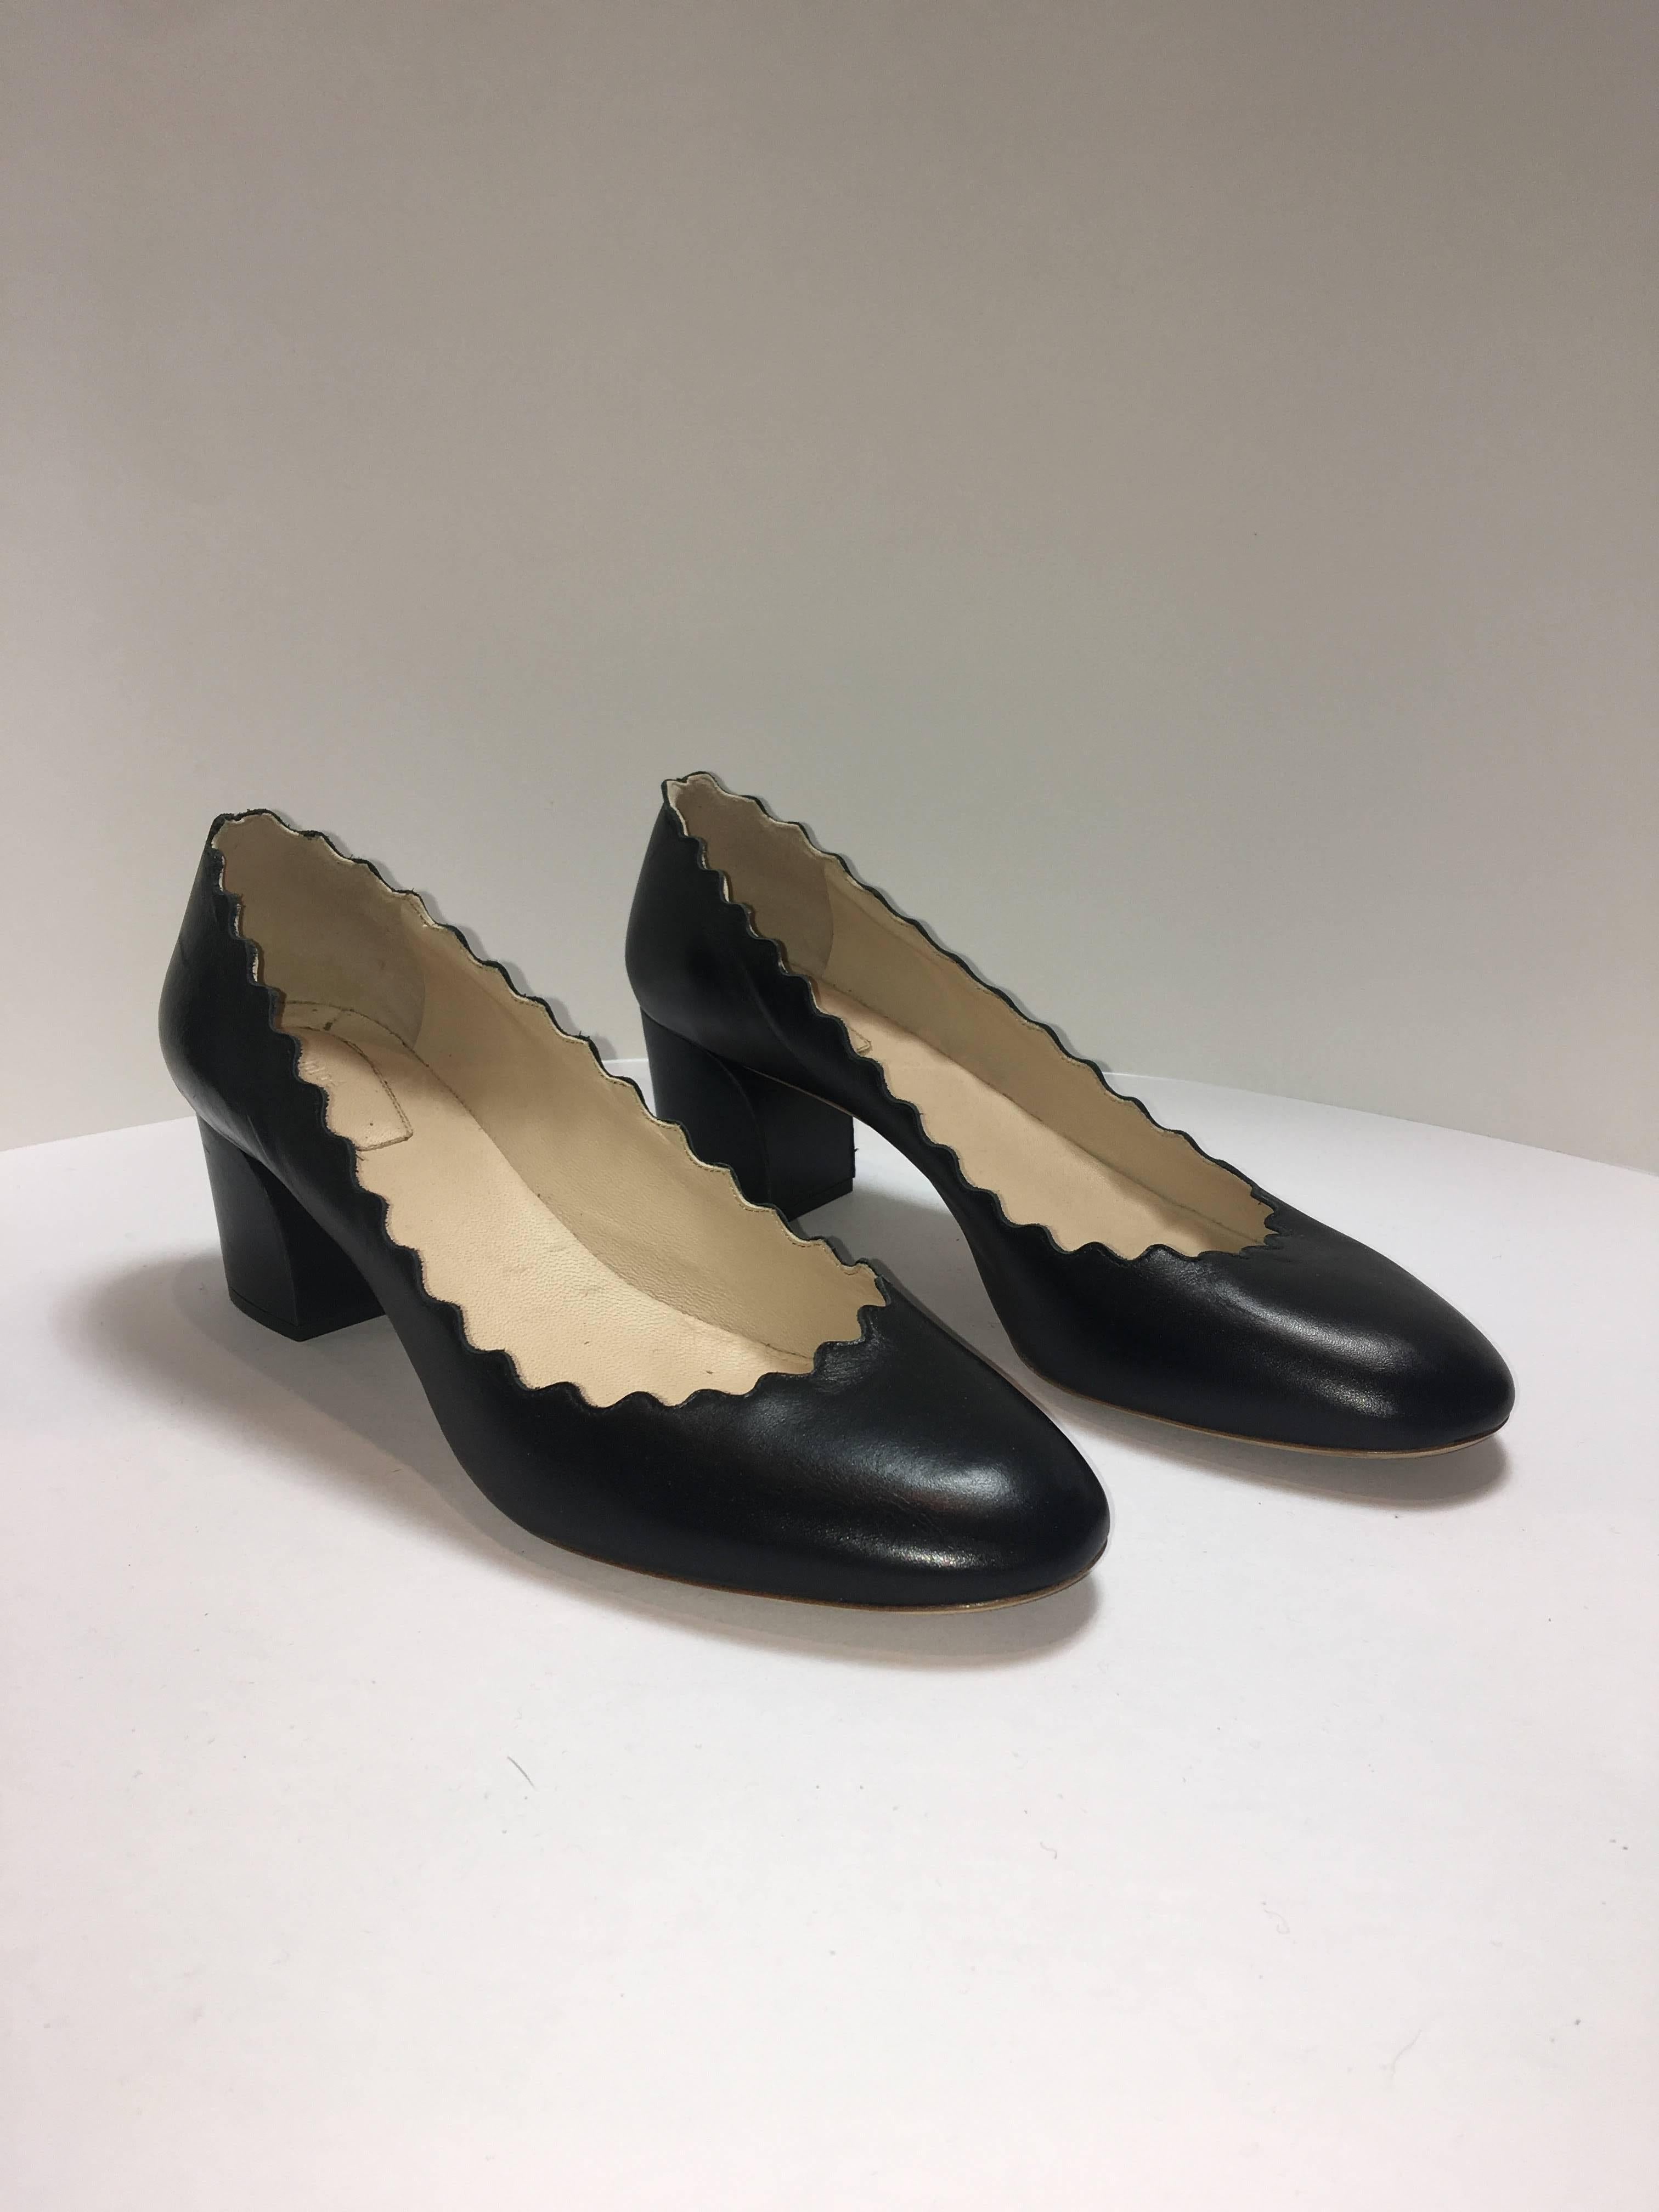 Chloe Scallop Trimmed Chunky Block Heel. Black Leather and Rounded Toe in size 41.